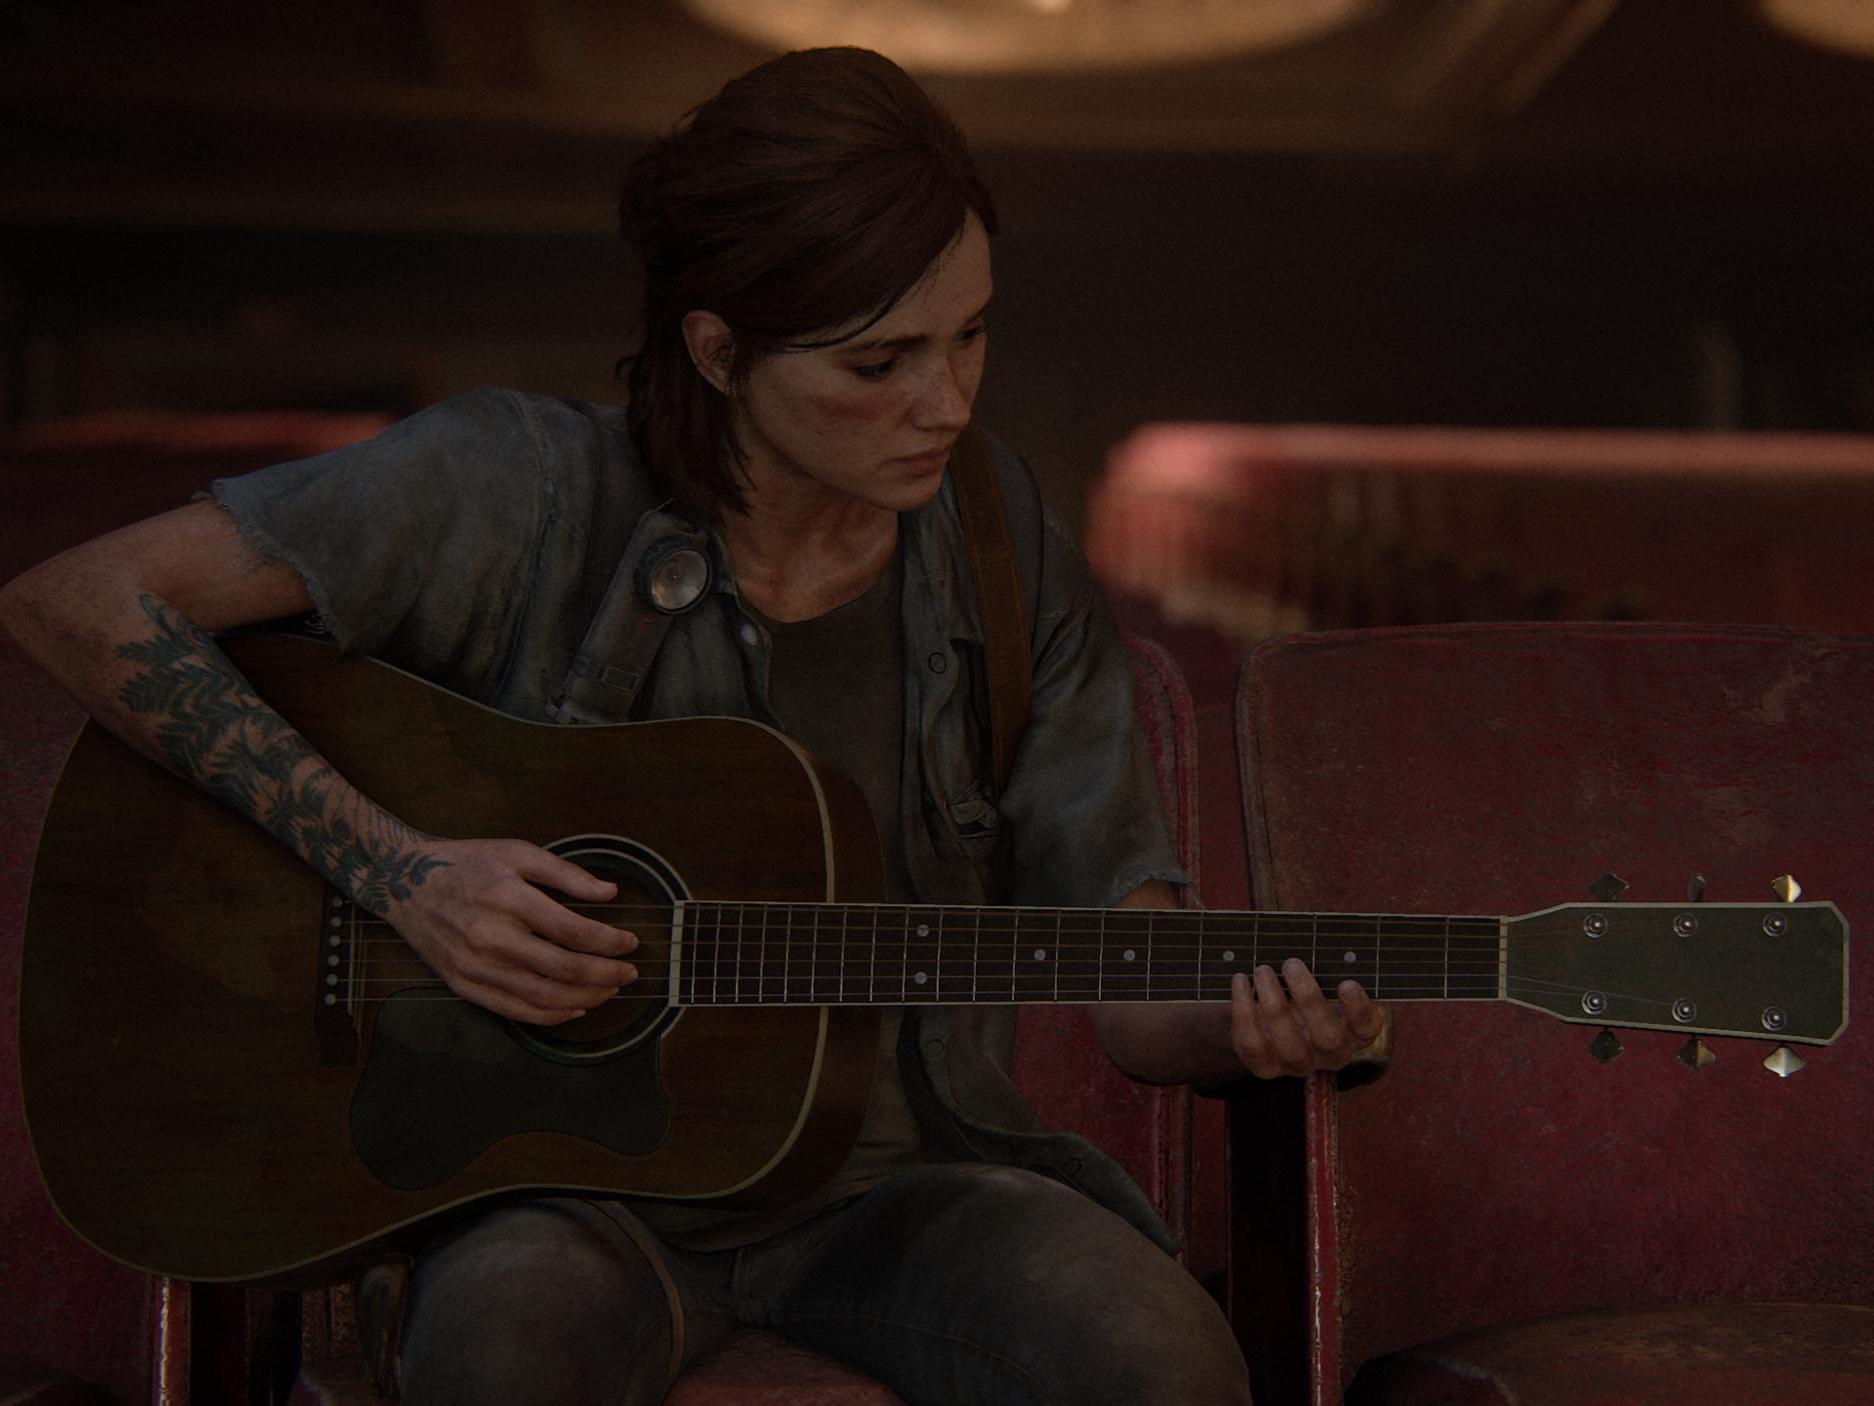 Ellie strums her guitar in a quiet scene from 'The Last of Us Part II'